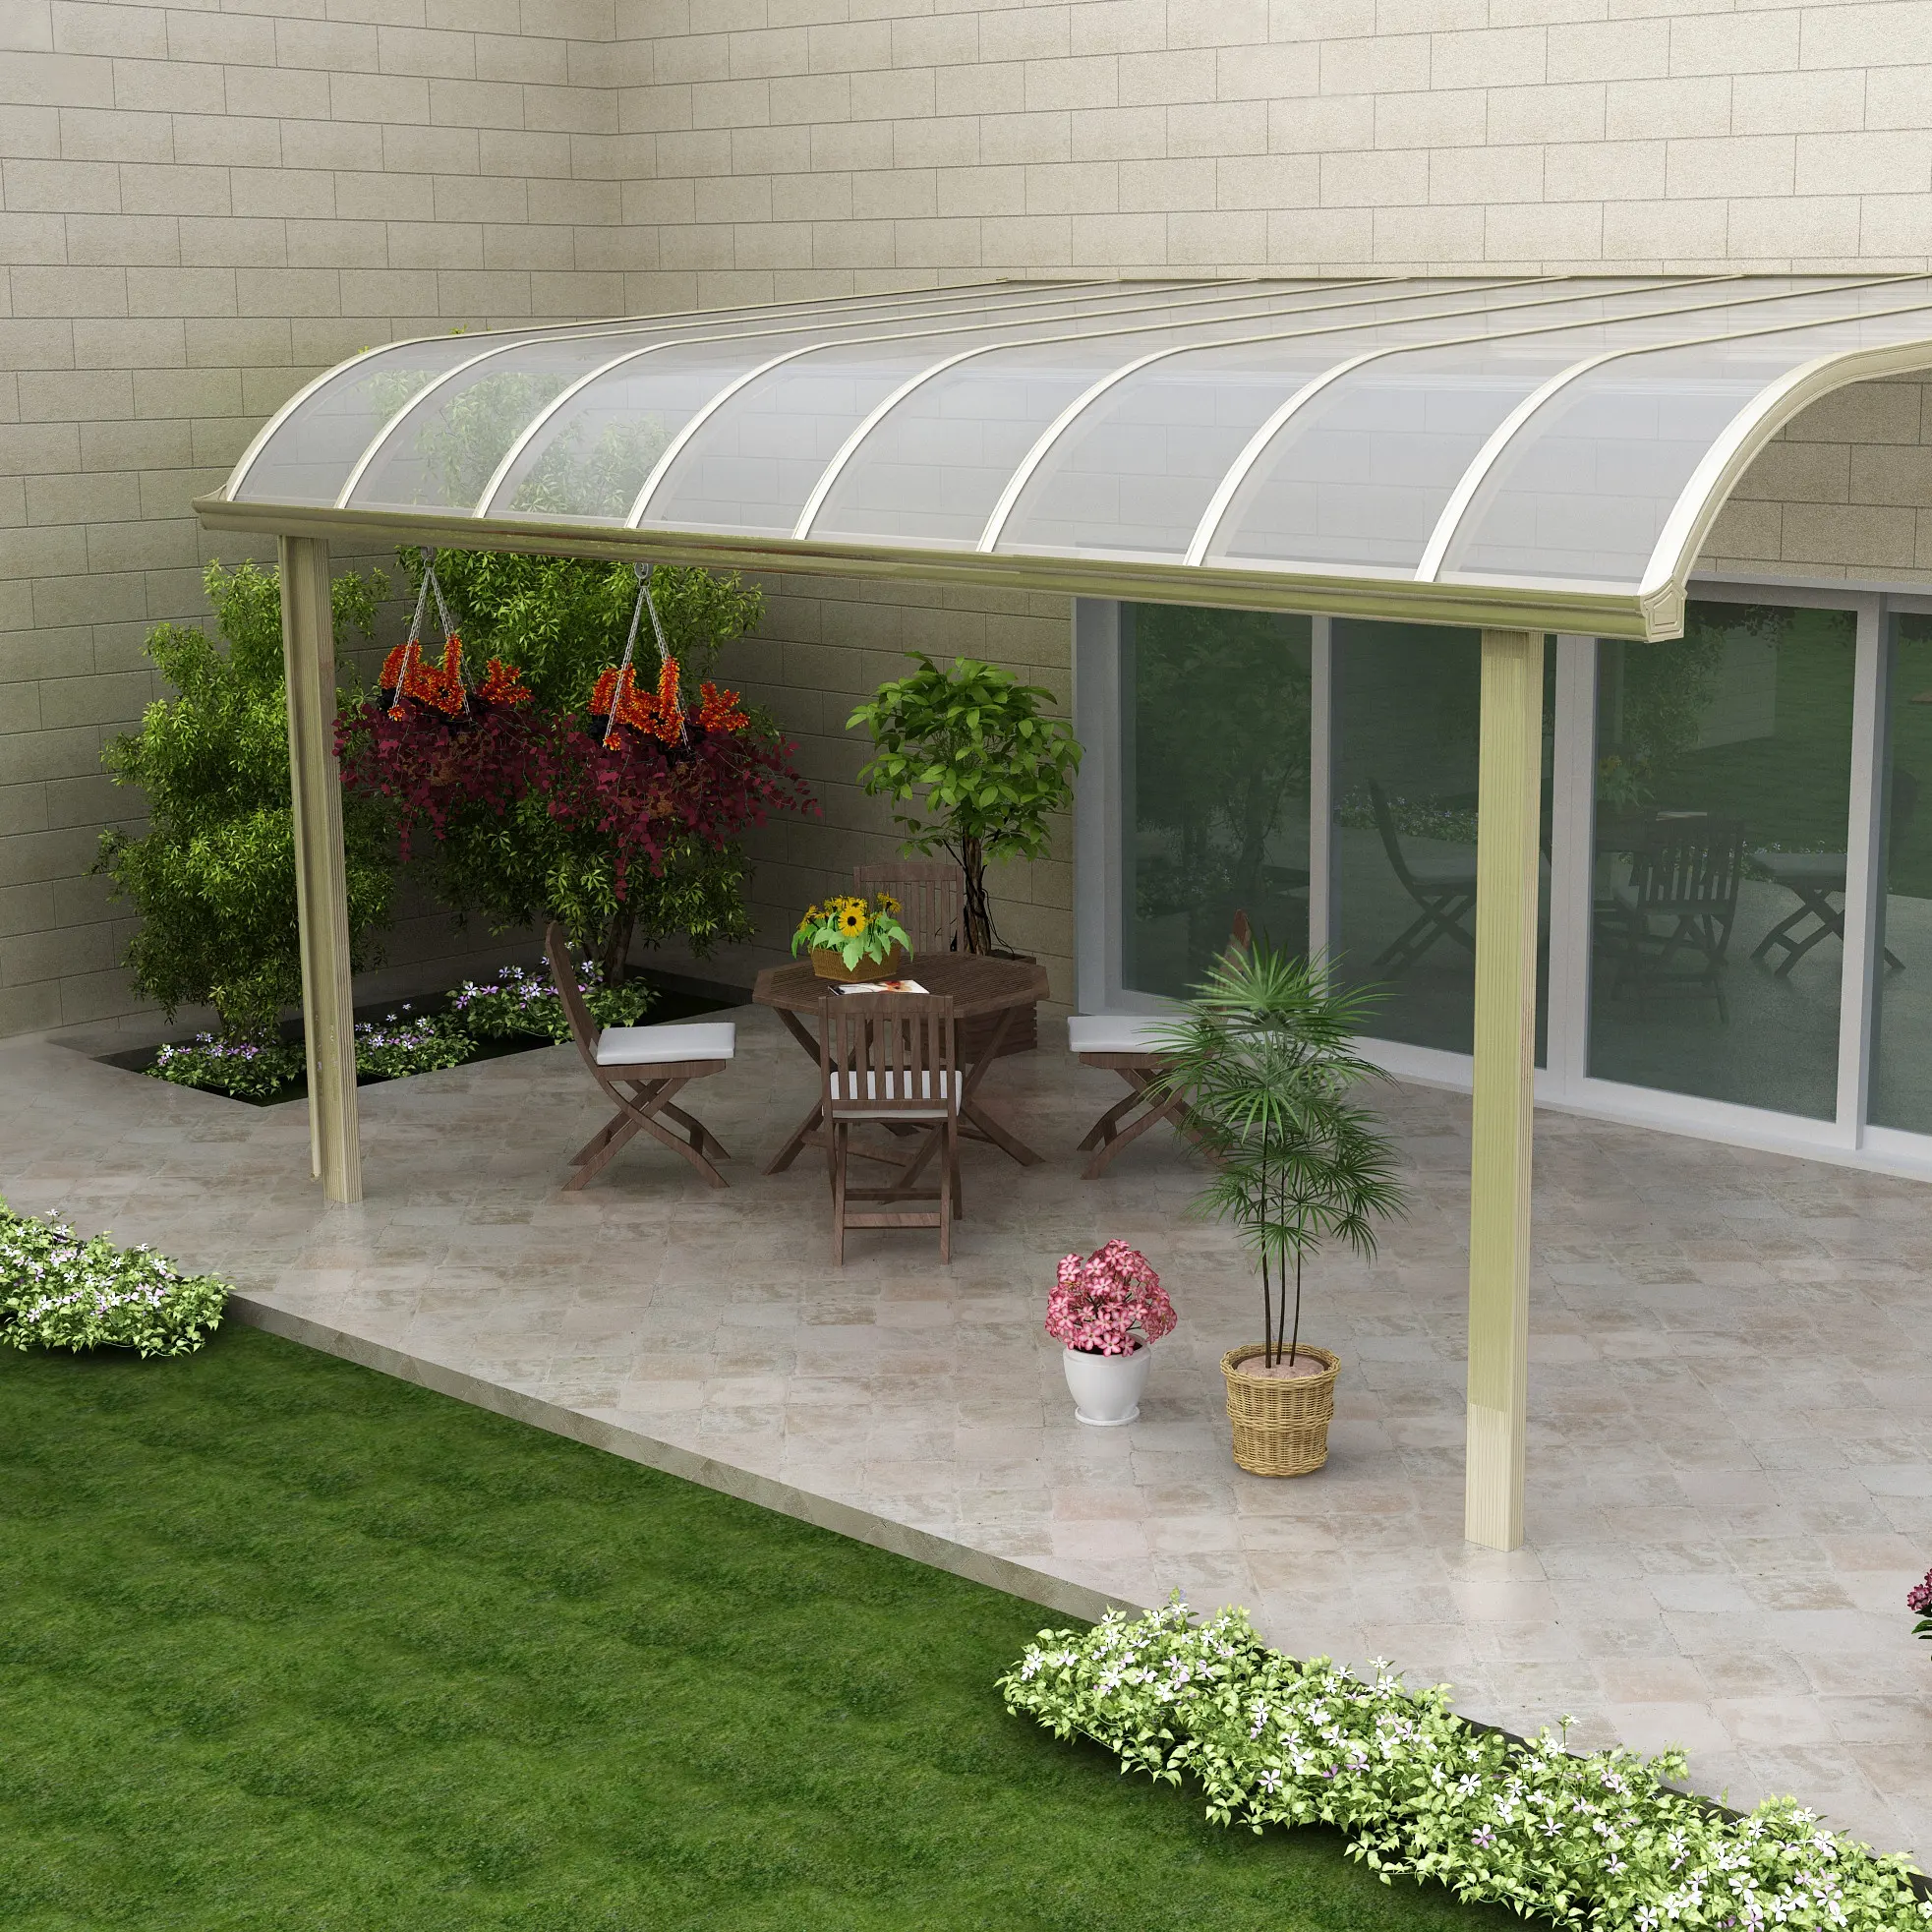 Polycarbonate Awning China Trade,Buy China Direct From 